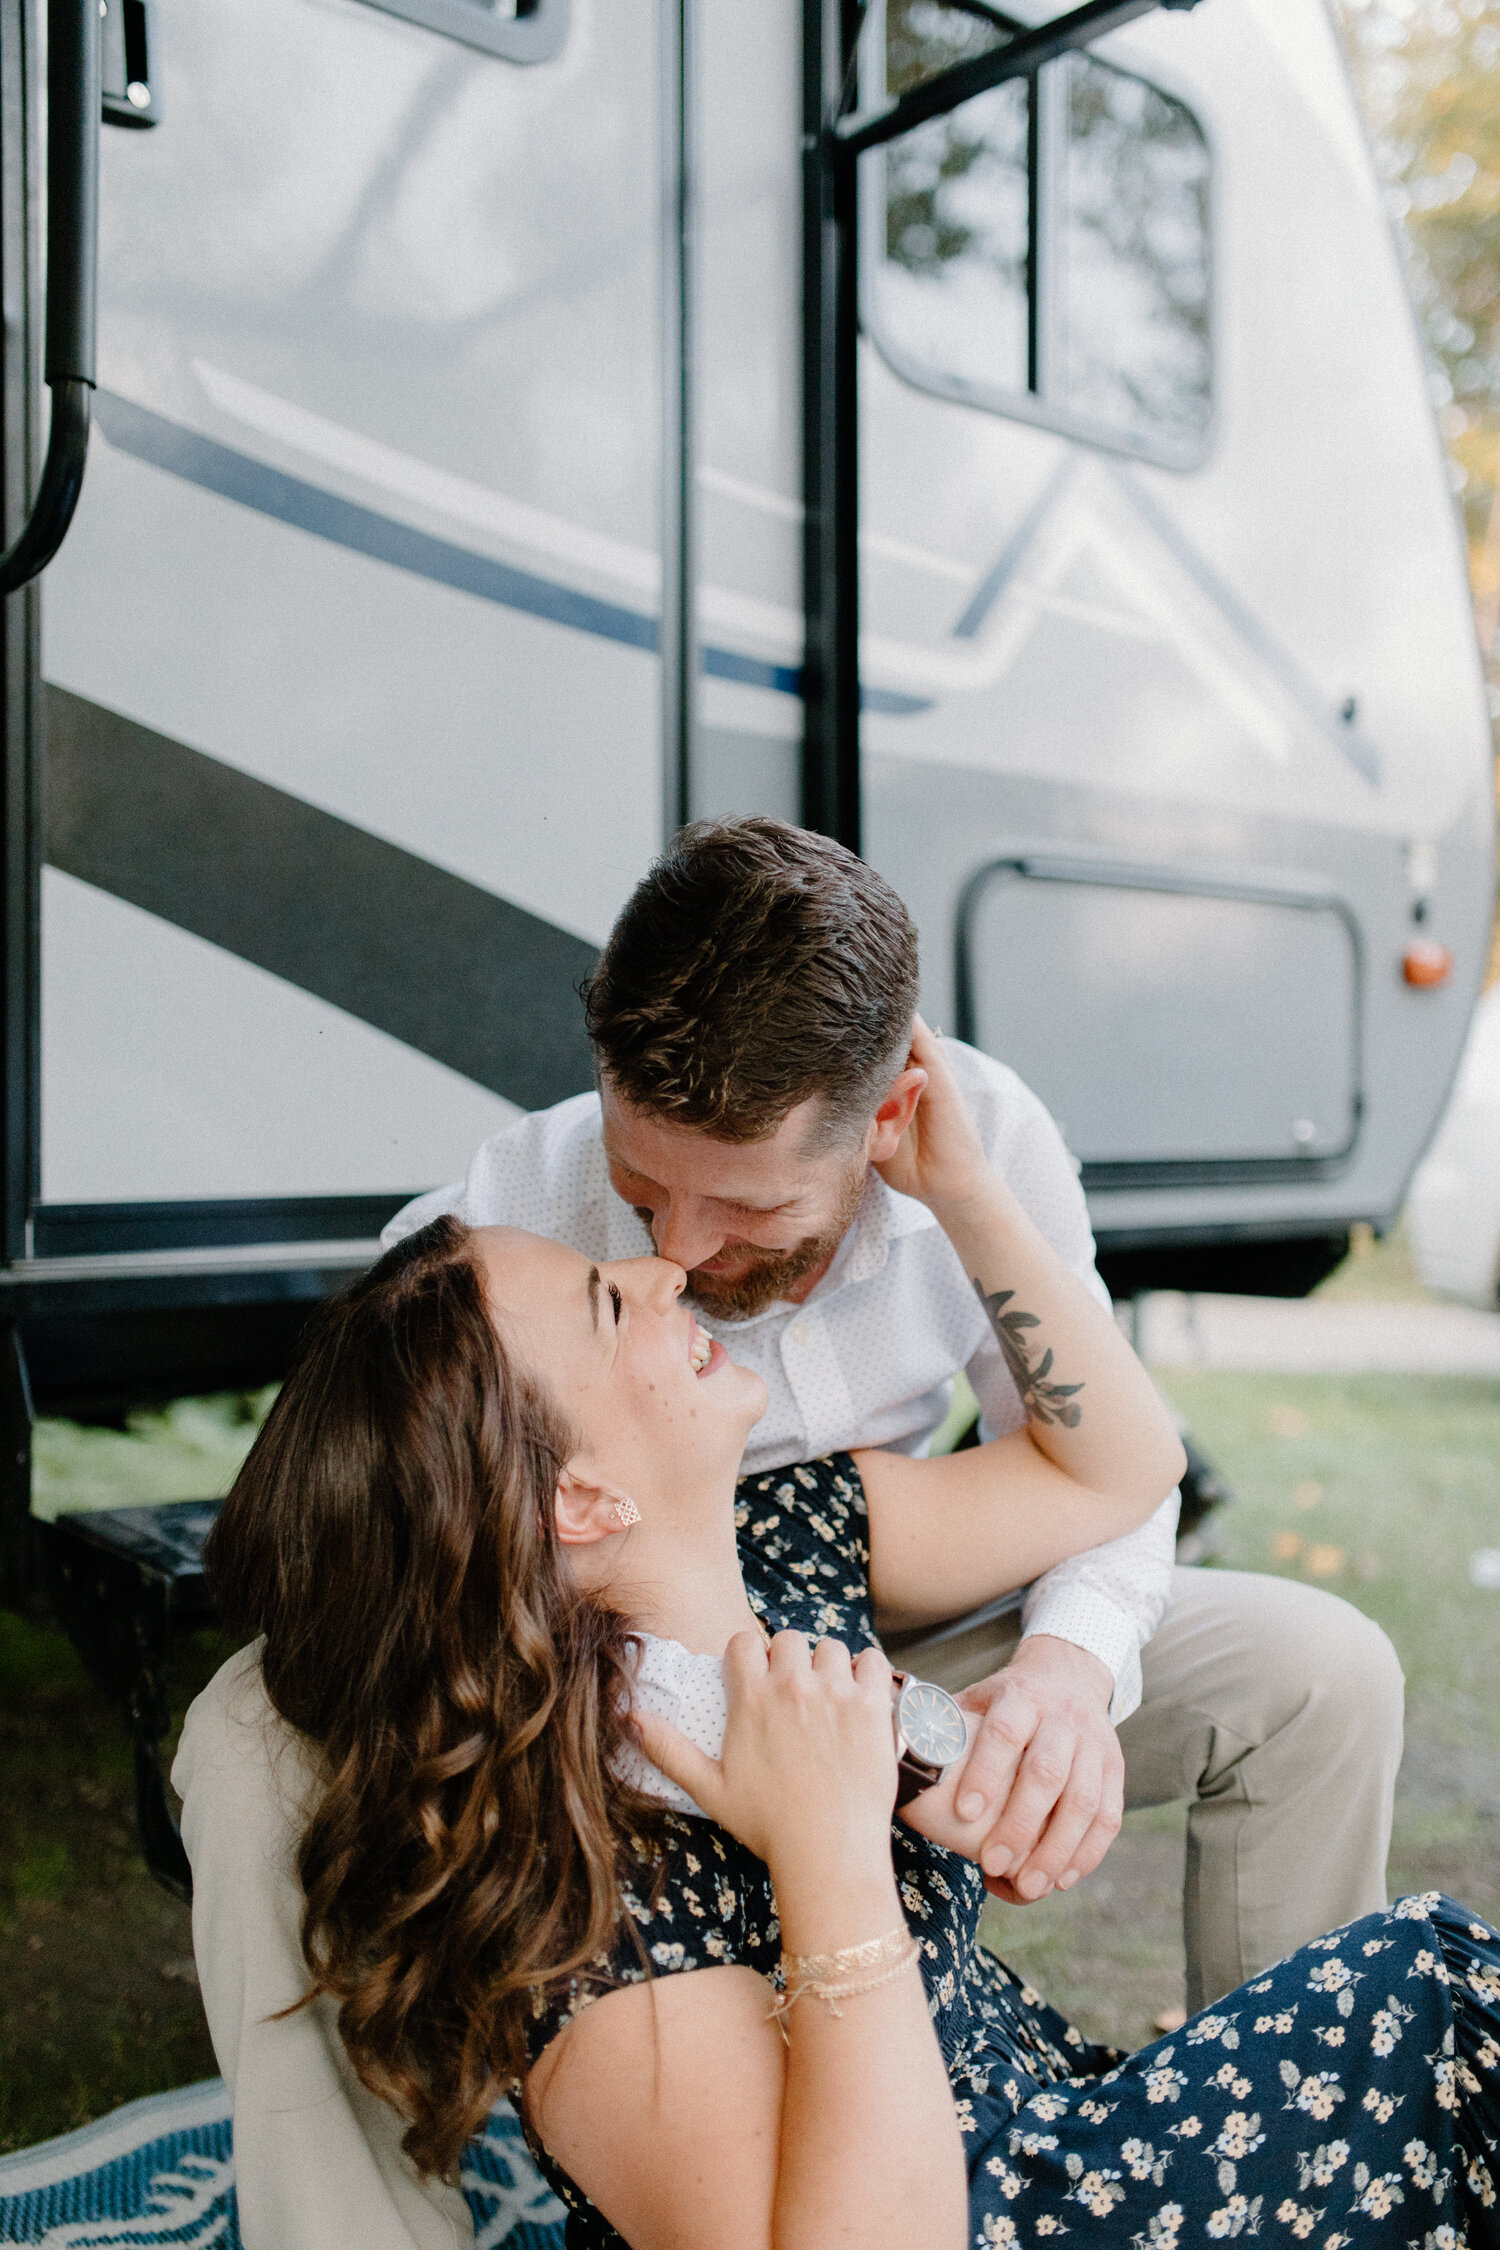  While sitting on a picnic blanket positioned outside their camper rv, Chelsea Mason Photography captures this groom kissing his bride and smiling during this engagement session in the woods near Ottawa, Canada. Wooded outdoorsy camper engagement ses